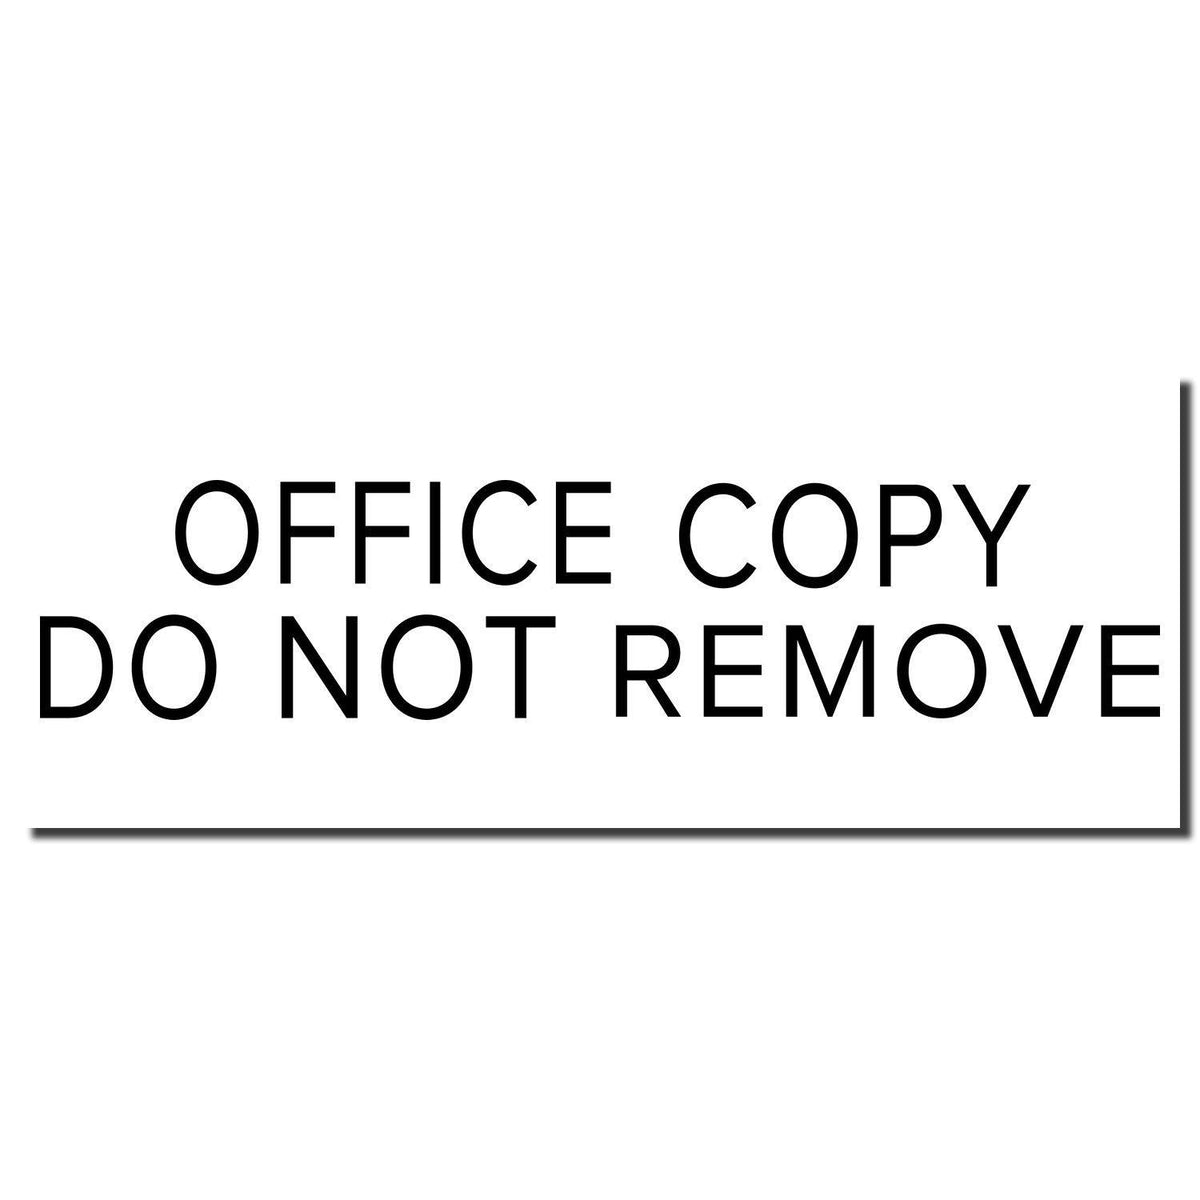 Enlarged Imprint Large Narrow Font Office Copy Do Not Remove Rubber Stamp Sample